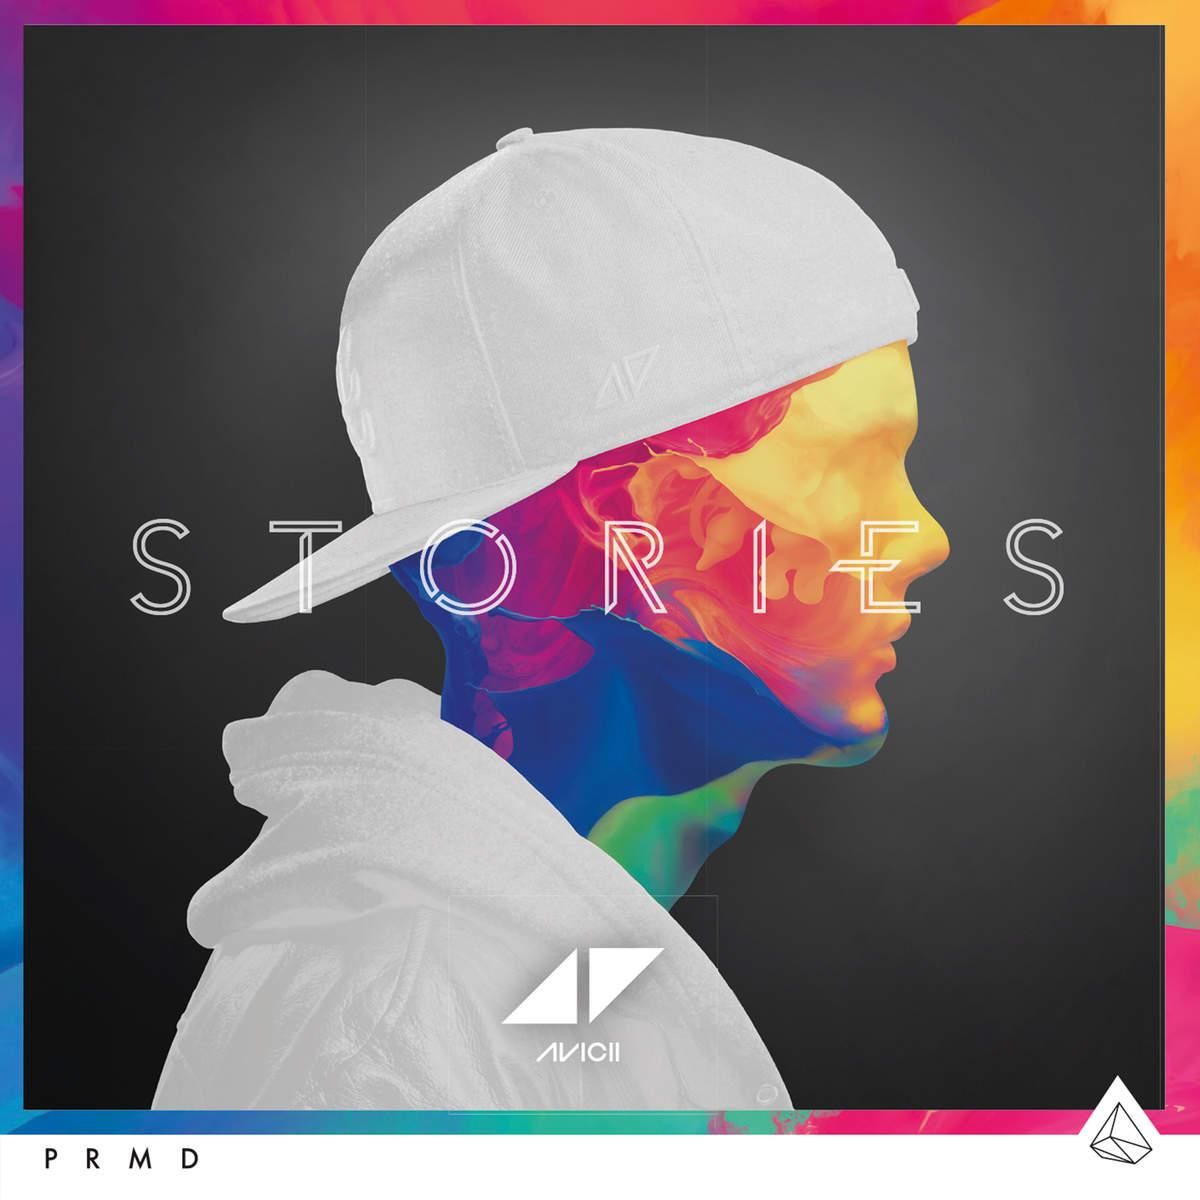 Major New Albums You'll Be Listening To This Fall. Avicii